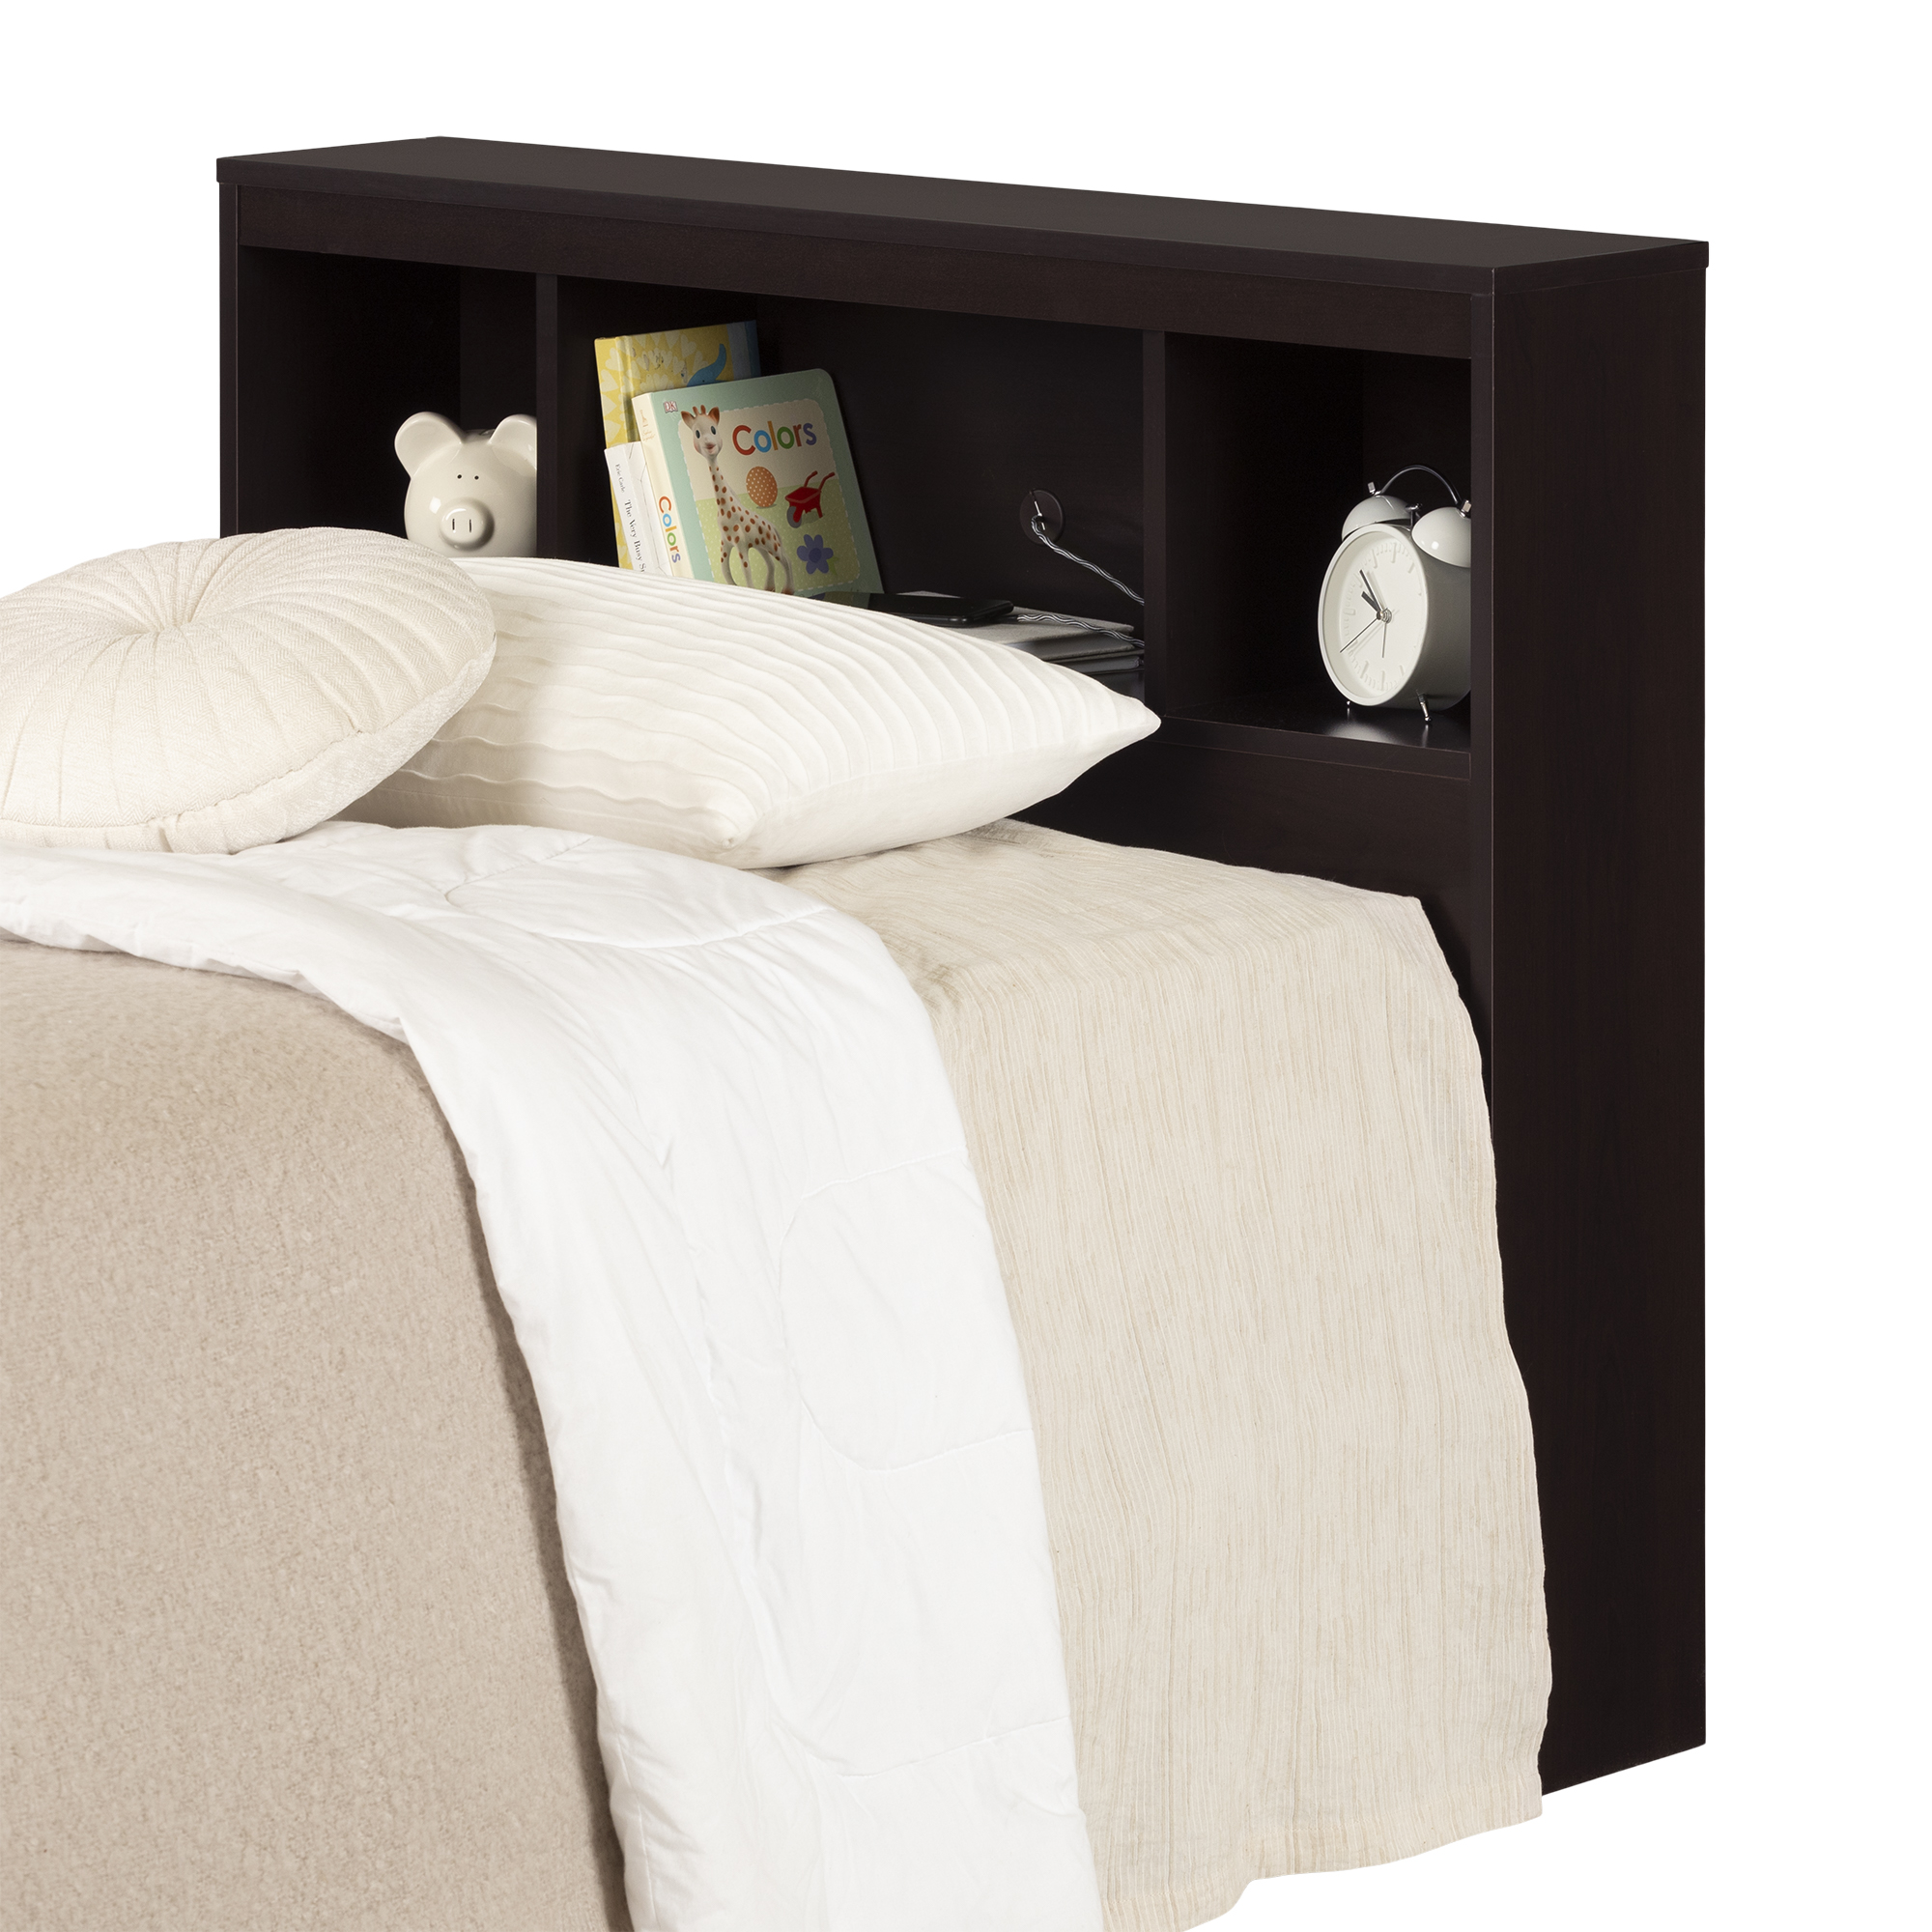 South Shore Spark Kid's Bookcase Headboard, Twin, Chocolate - image 2 of 10